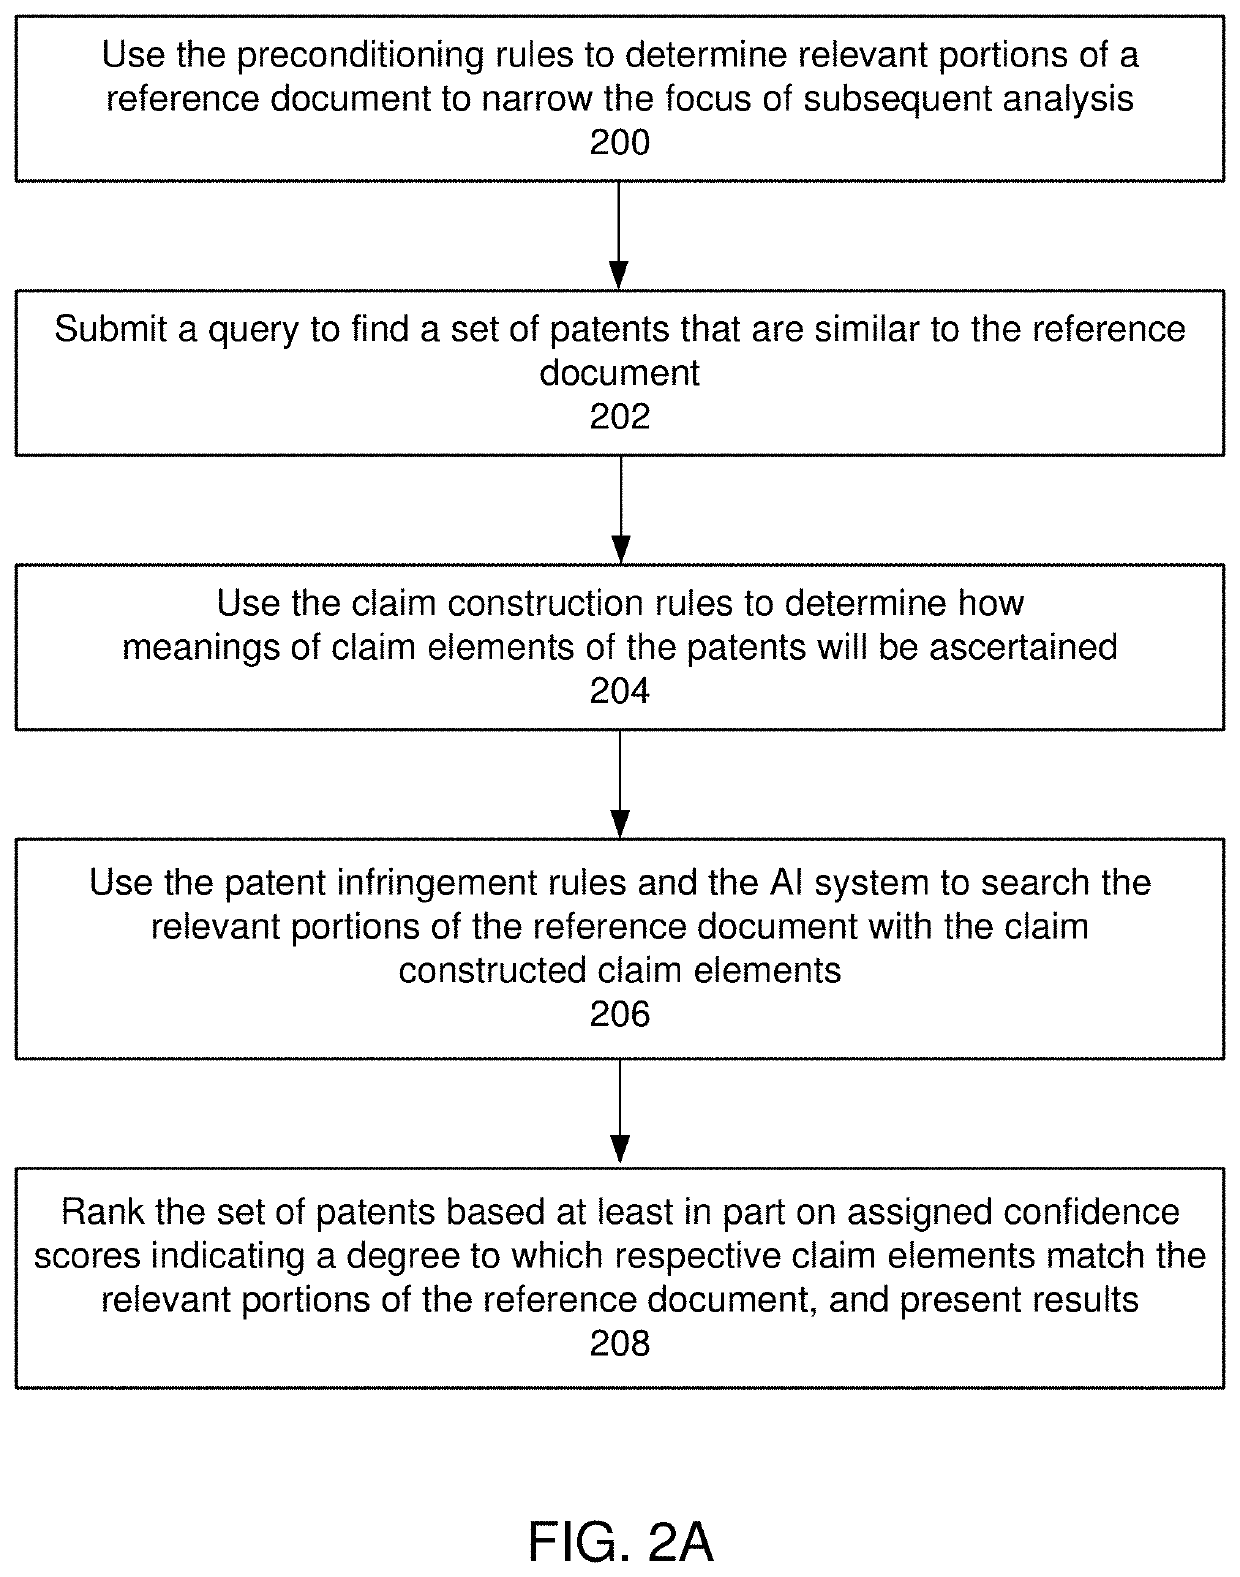 Hybrid artificial intelligence system for semi-automatic patent pinfringement analysis